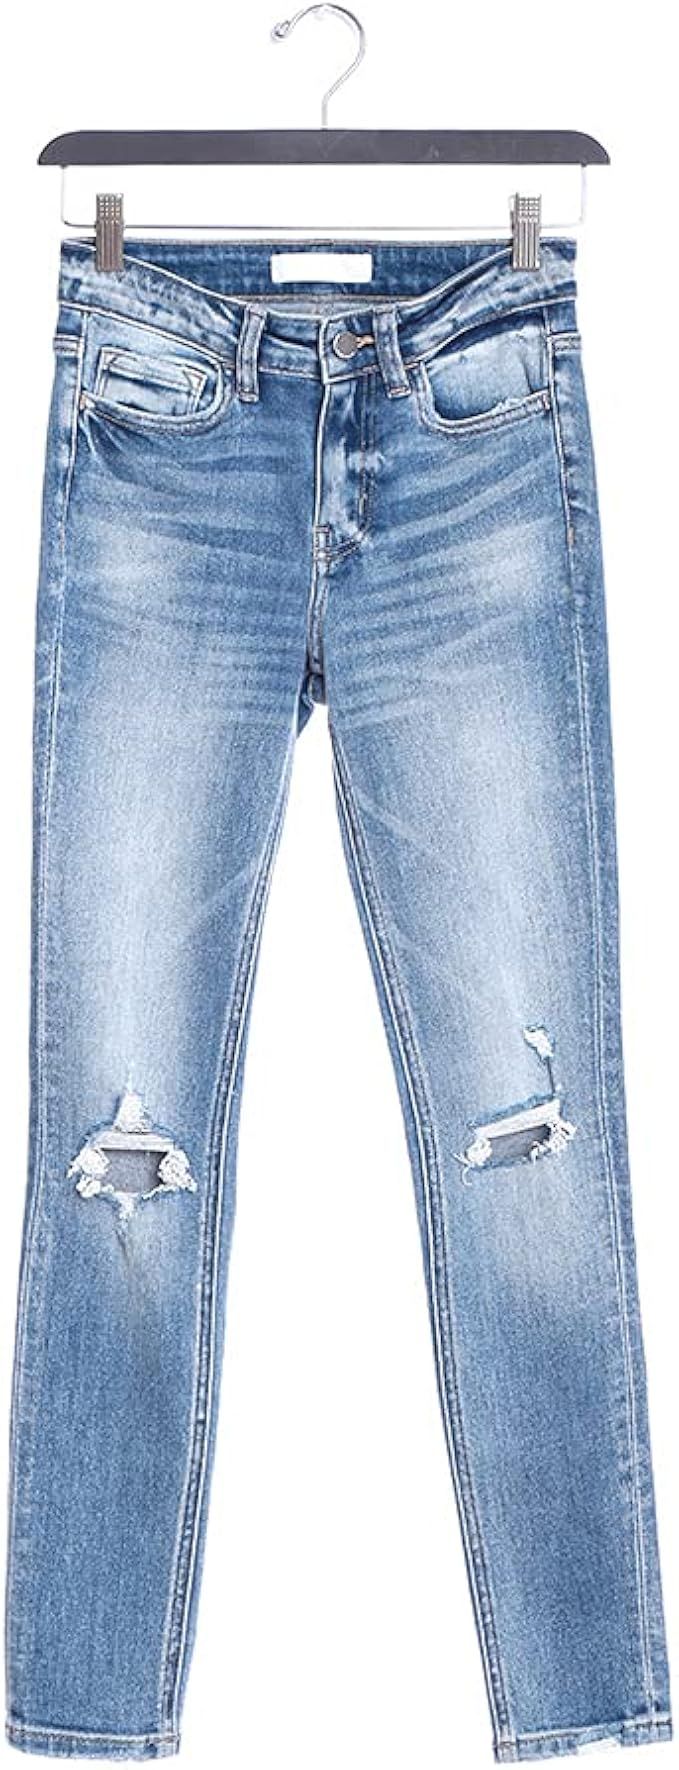 Flying Monkey Mid-Rise Skinny Jeans Distressed Blue | Amazon (US)